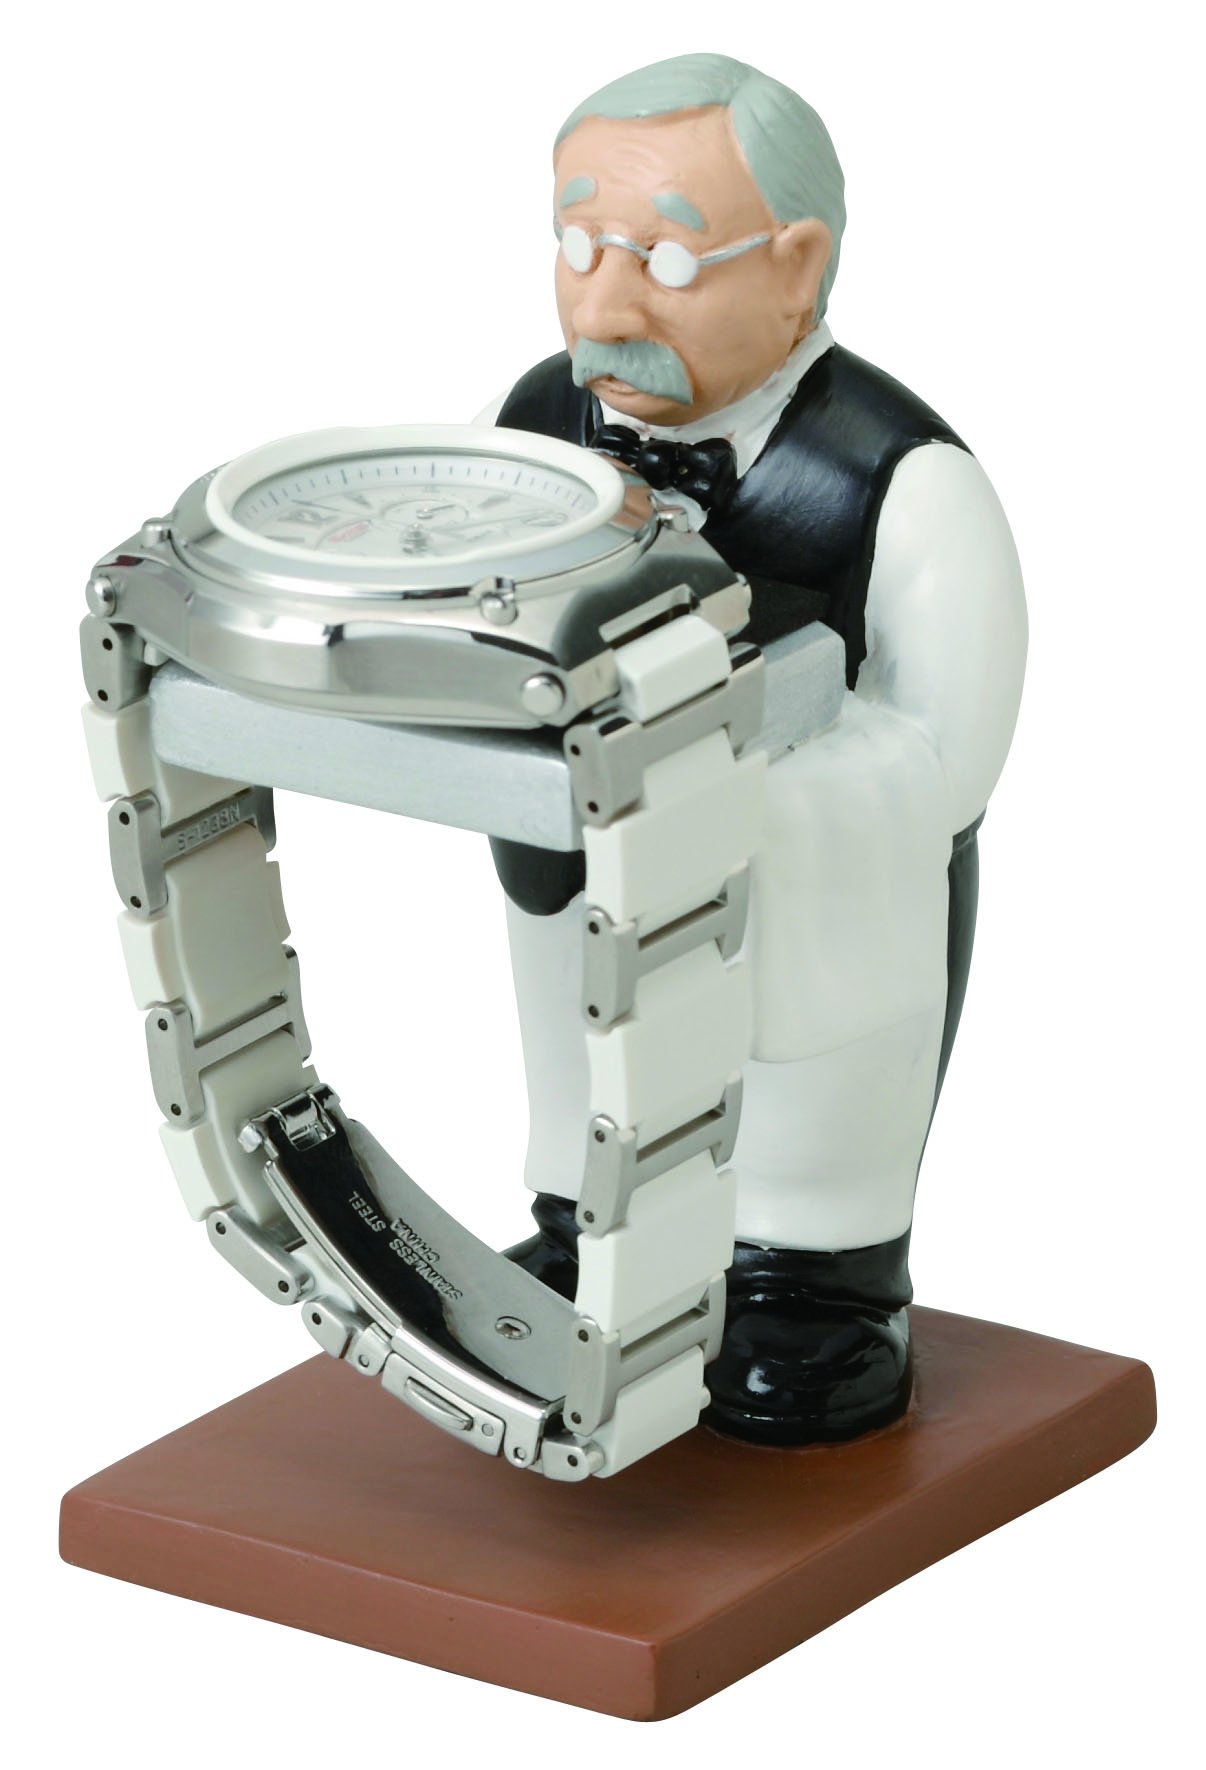 Seto Craft Motif. Watch Stand, Old Man SR-3226-170, Black, Individual Package Size: 3.3 x 3.0 x 5.1 inches (8.3 x 7.6 x 13 cm)